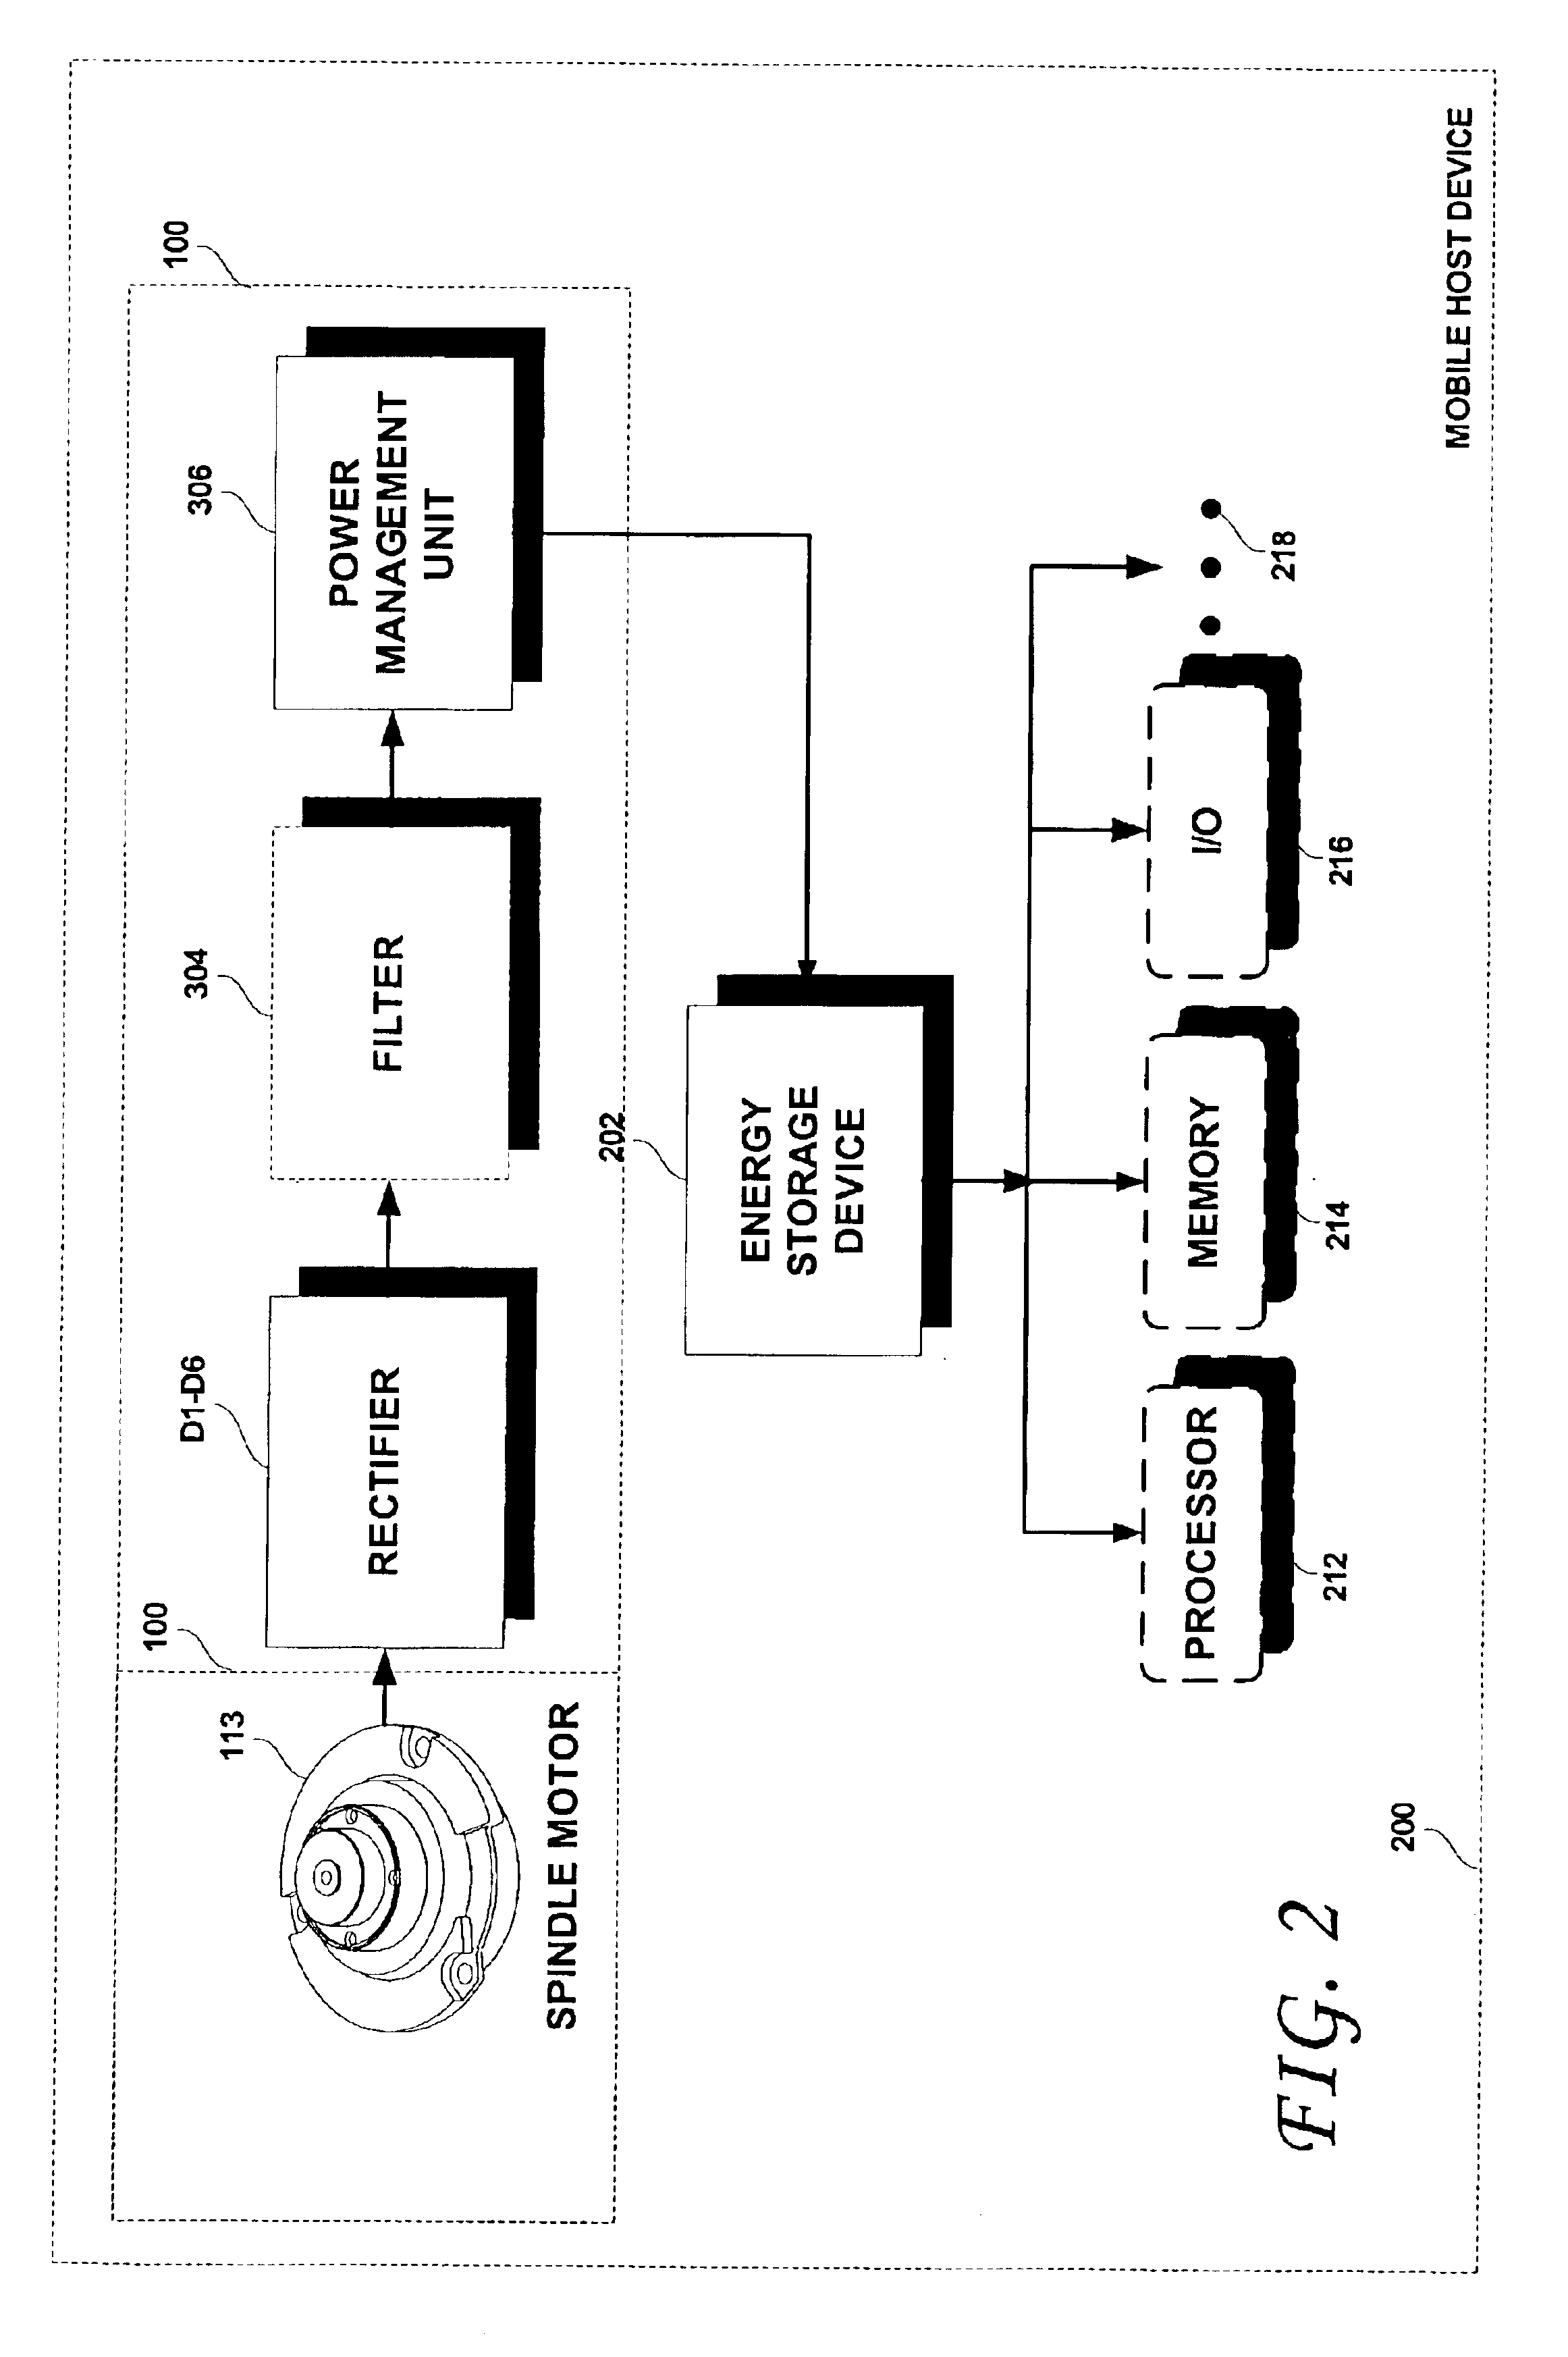 Methods, systems and devices for converting the kinetic energy of a rotating disk drive spindle motor into electrical energy to charge a rechargeable battery